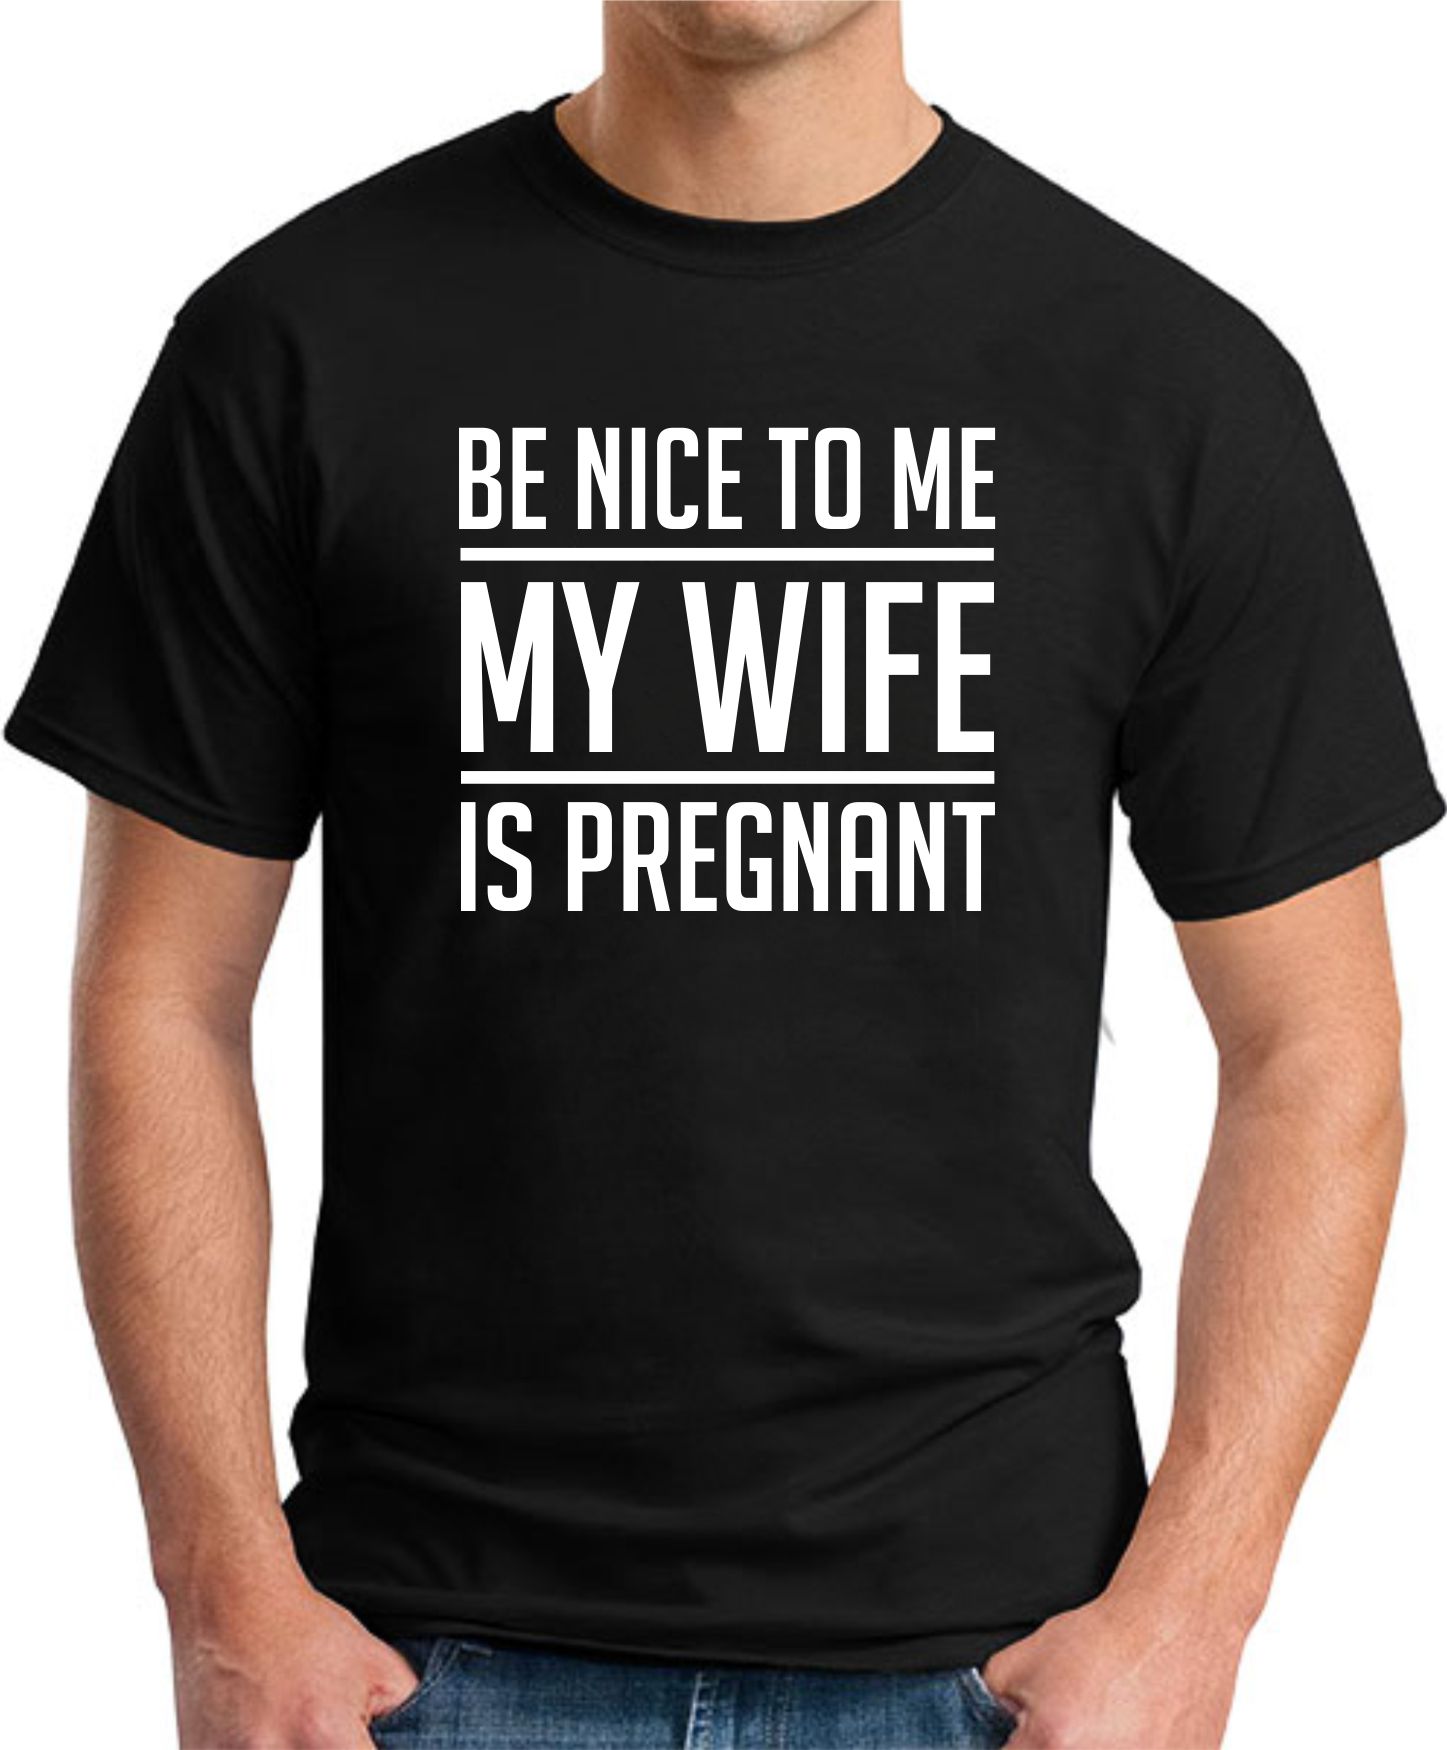 BE NICE TO ME MY WIFE IS PREGNANT black